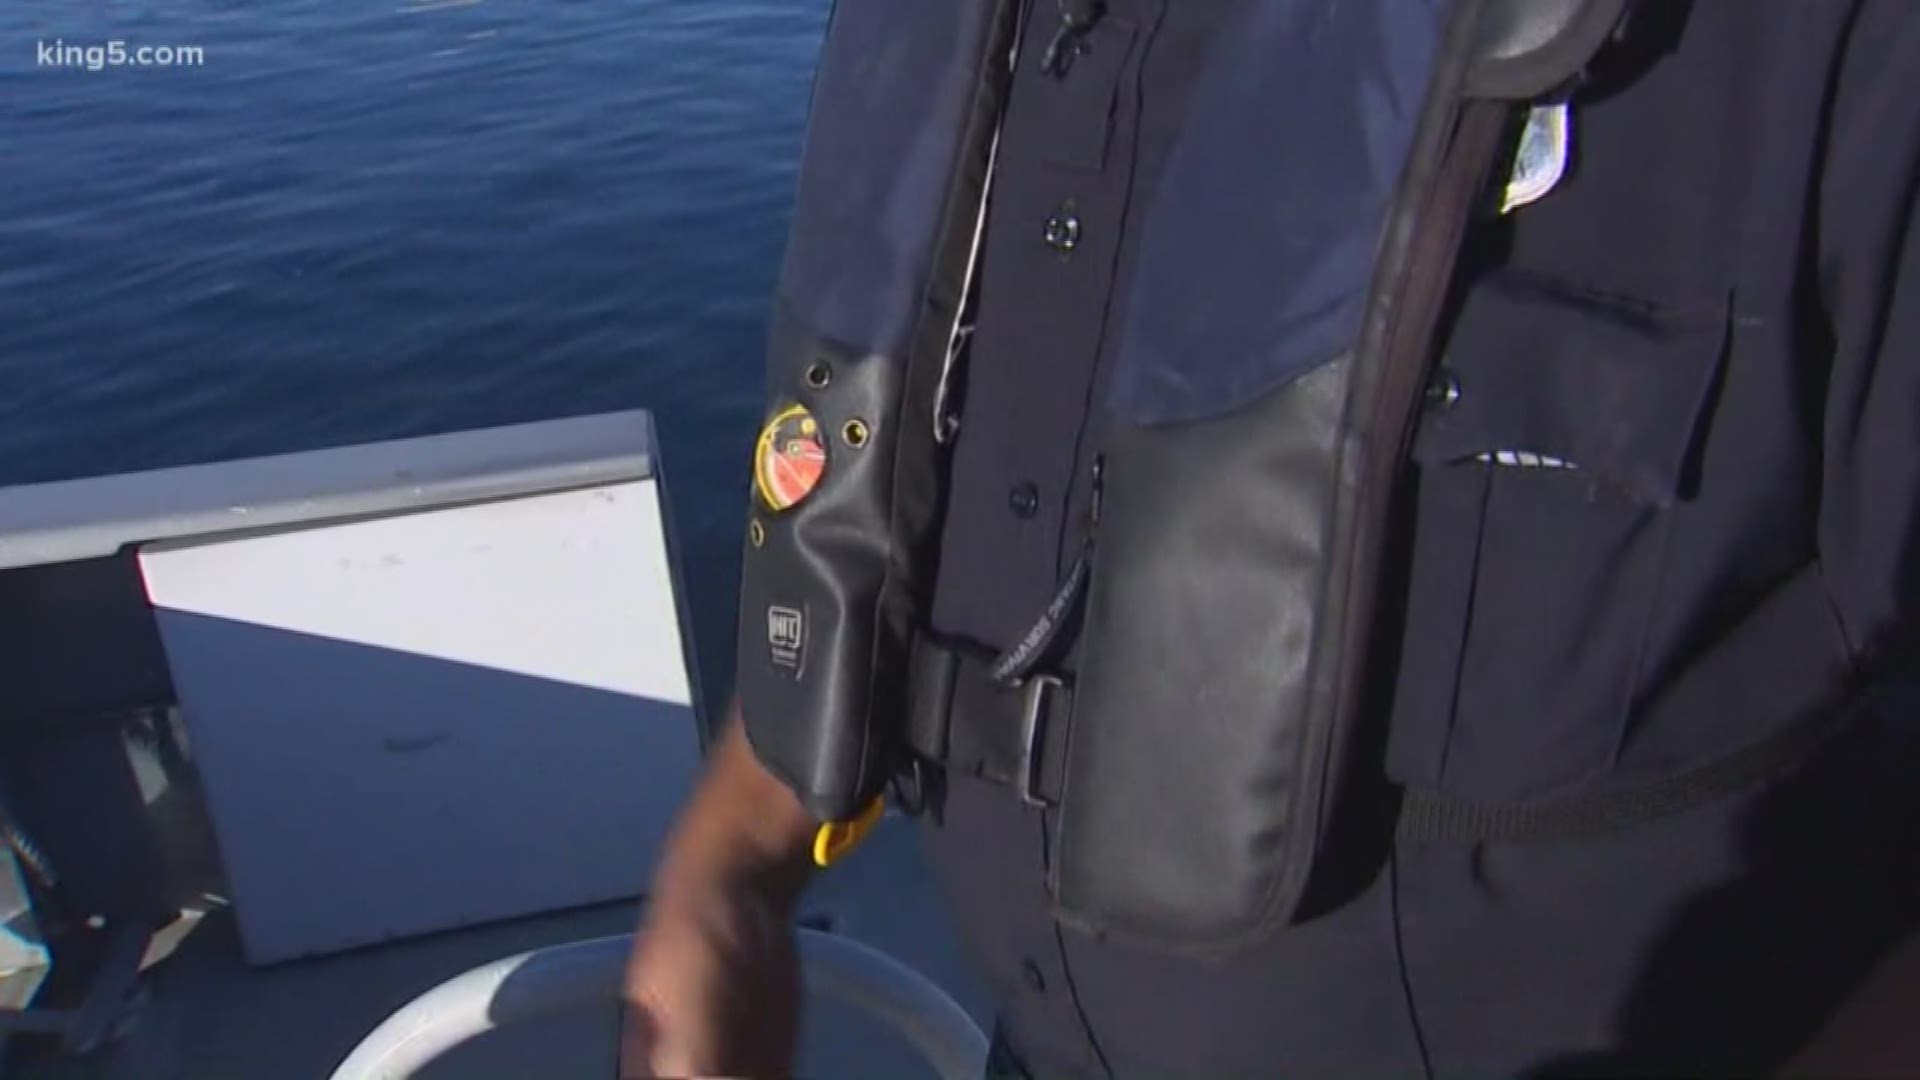 After two drownings in Seattle, police are urging people to practice water safety this summer.